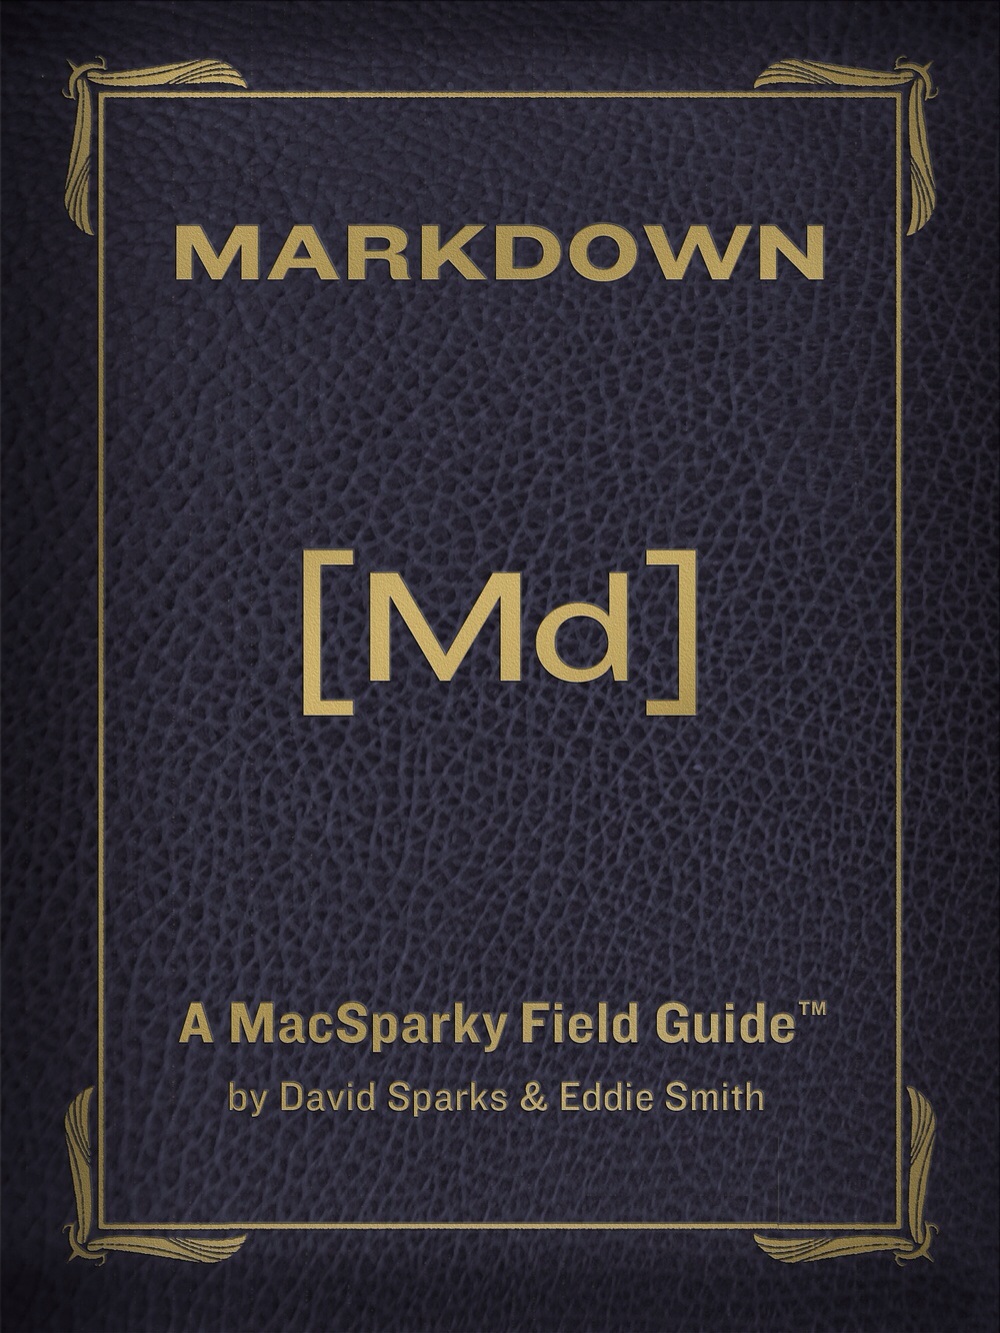   Book Cover for David Sparks's Field Guide: Markdown.  